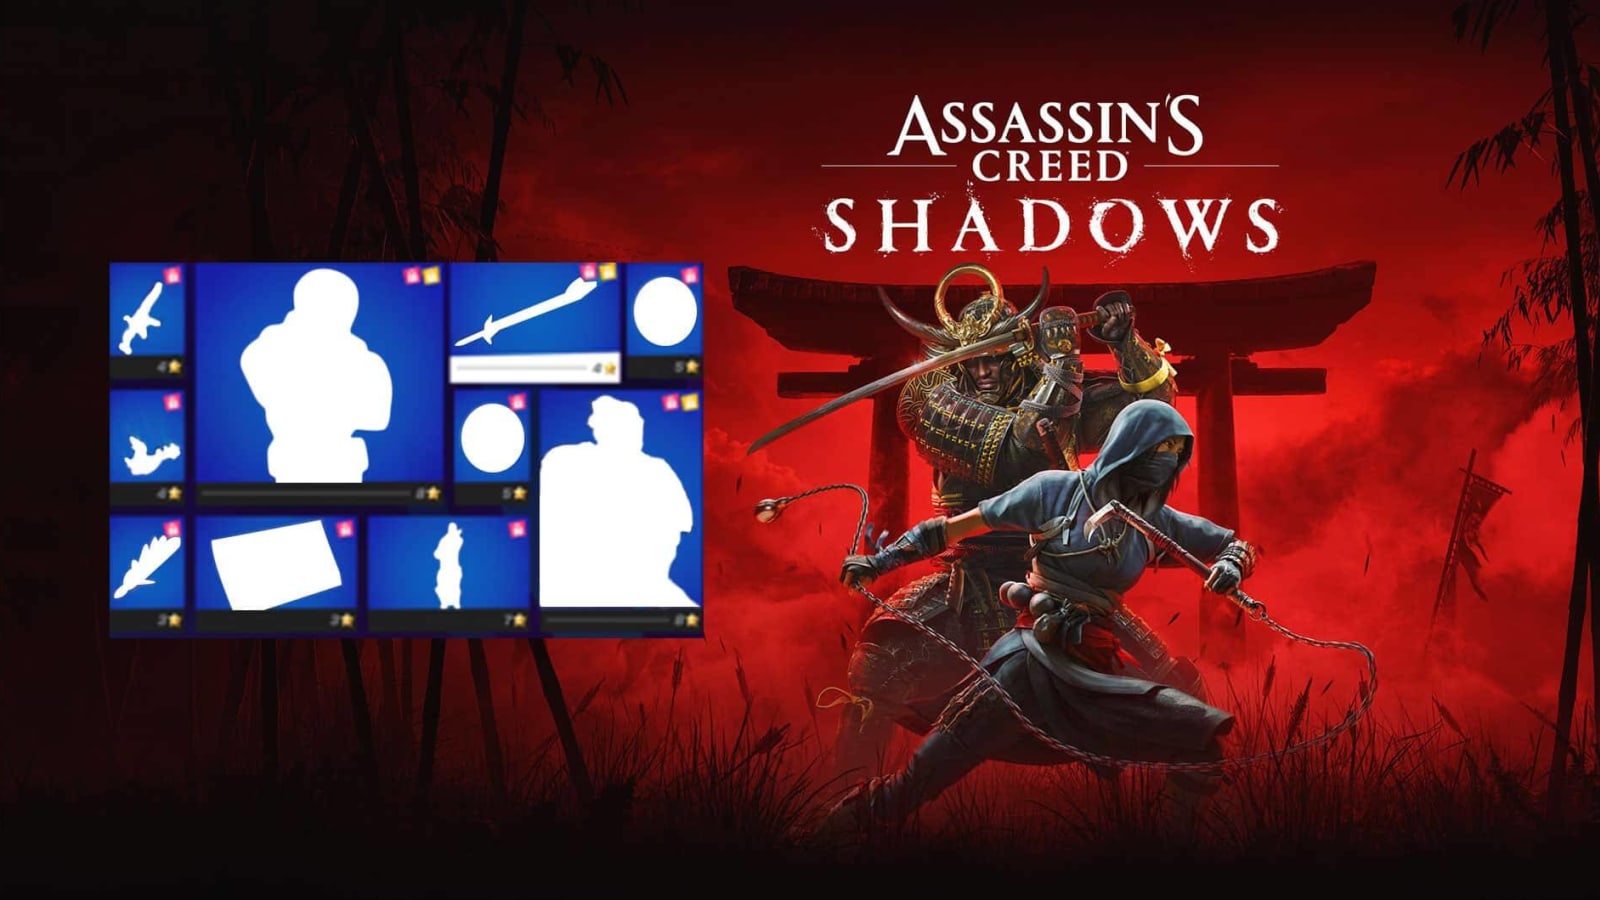 Assassin’s Creed Shadows Will Have a Battle Pass